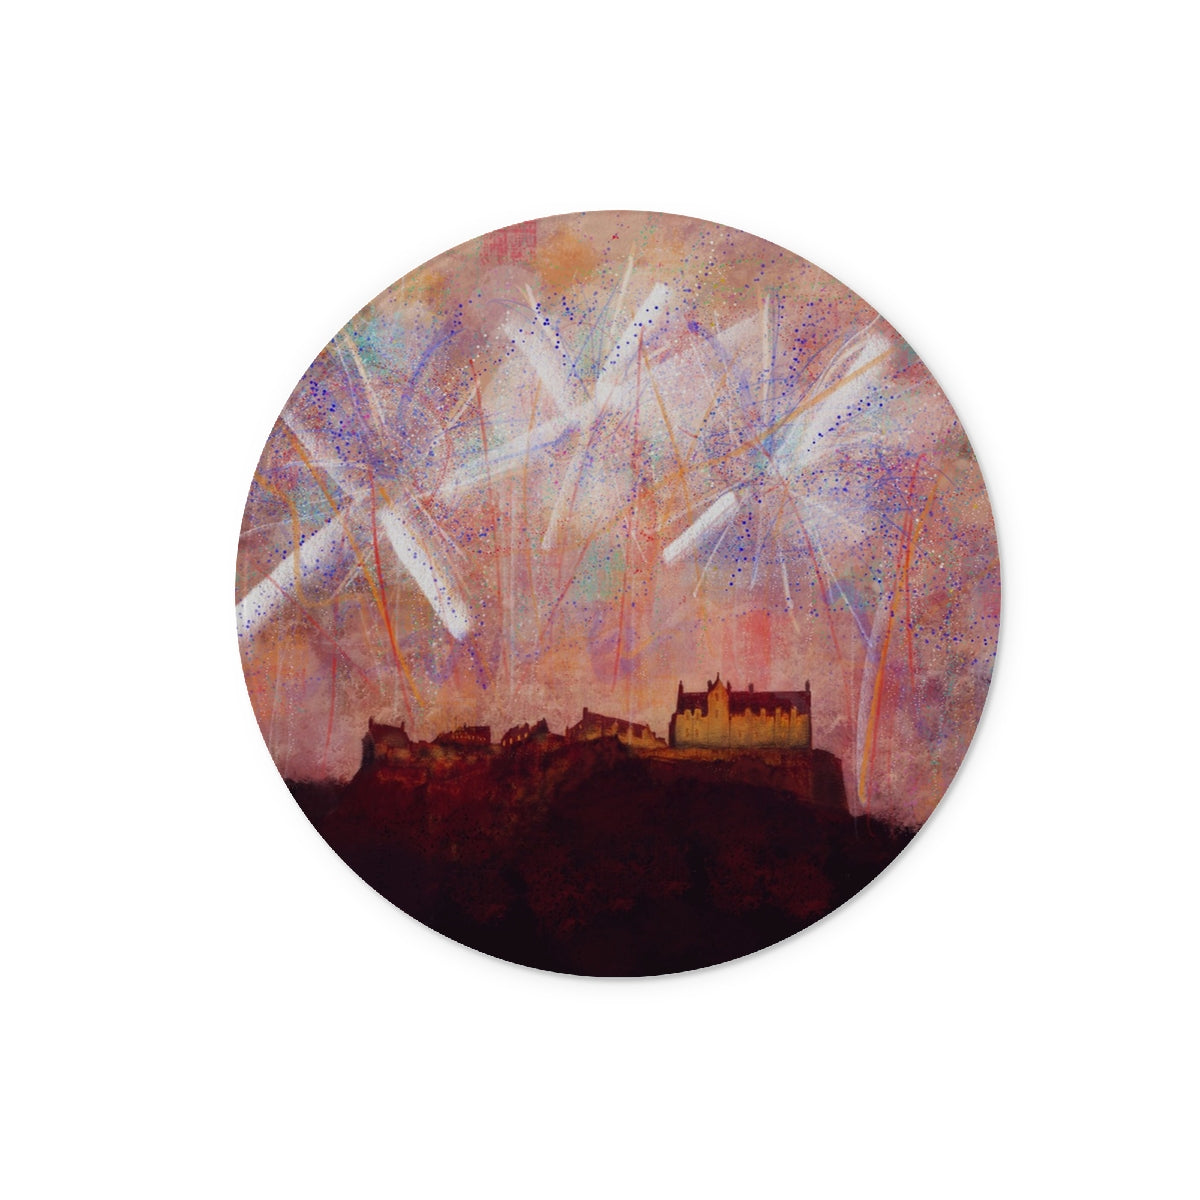 Edinburgh Castle Fireworks Art Gifts Glass Chopping Board-Glass Chopping Boards-Edinburgh & Glasgow Art Gallery-12" Round-Paintings, Prints, Homeware, Art Gifts From Scotland By Scottish Artist Kevin Hunter